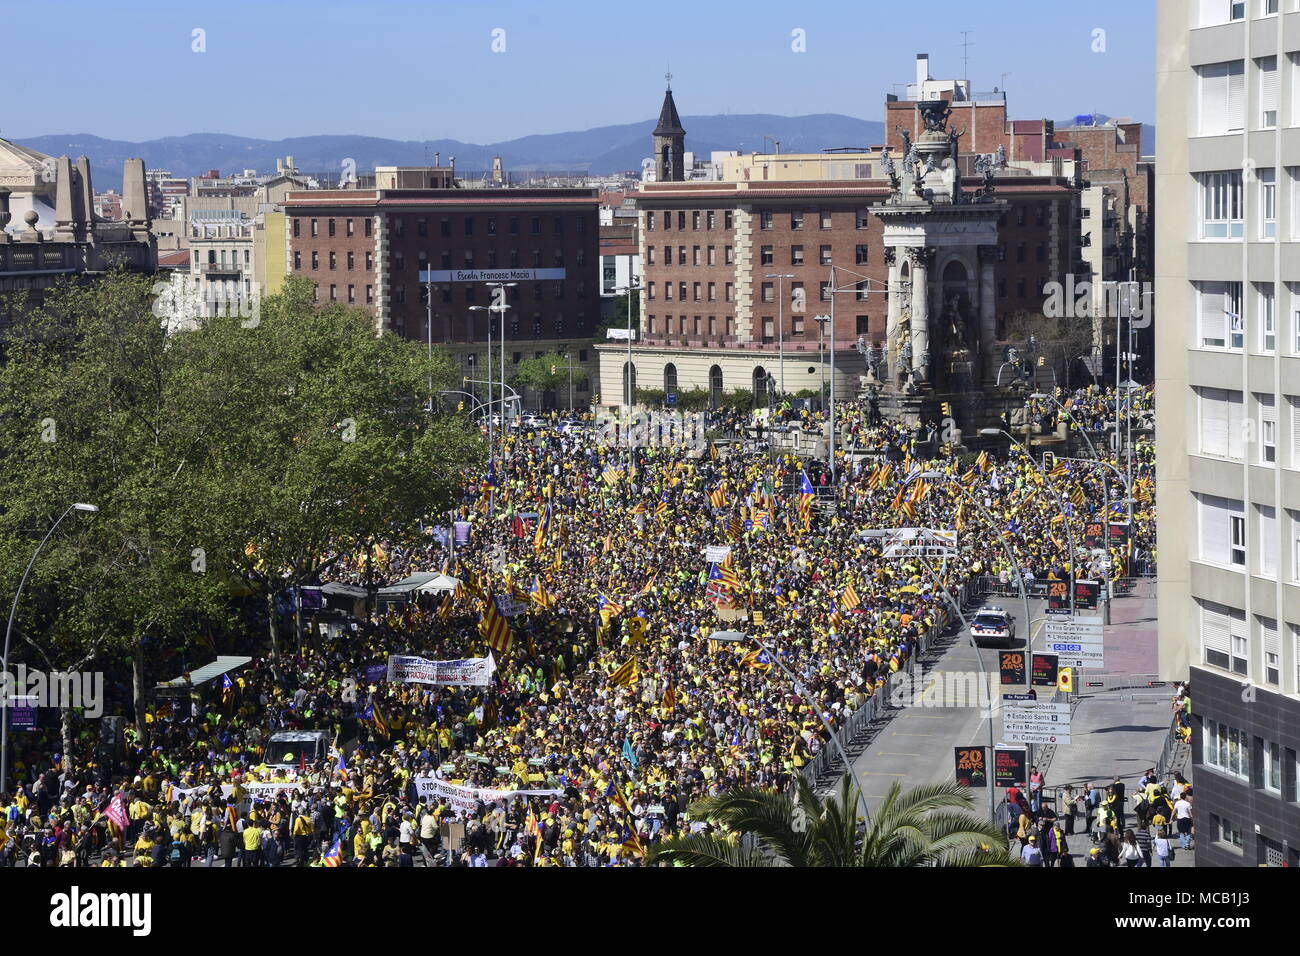 Barcelona, Spain. 15th April, 2018. Mass demonstration in Barcelona against political imprisonments. Nearly six months have passed since the imprisonment of the grassroots pro-independence activists Jordi Cuixart and Jordi Sànchez, the last presidential candidate. They were arrested by the Spanish police for their roles in the roadmap toward Catalan self-determination. To mark the occasion, a platform made up of various organizations in favour of civil rights and against Credit: Marc Soler/Alamy Live News Stock Photo